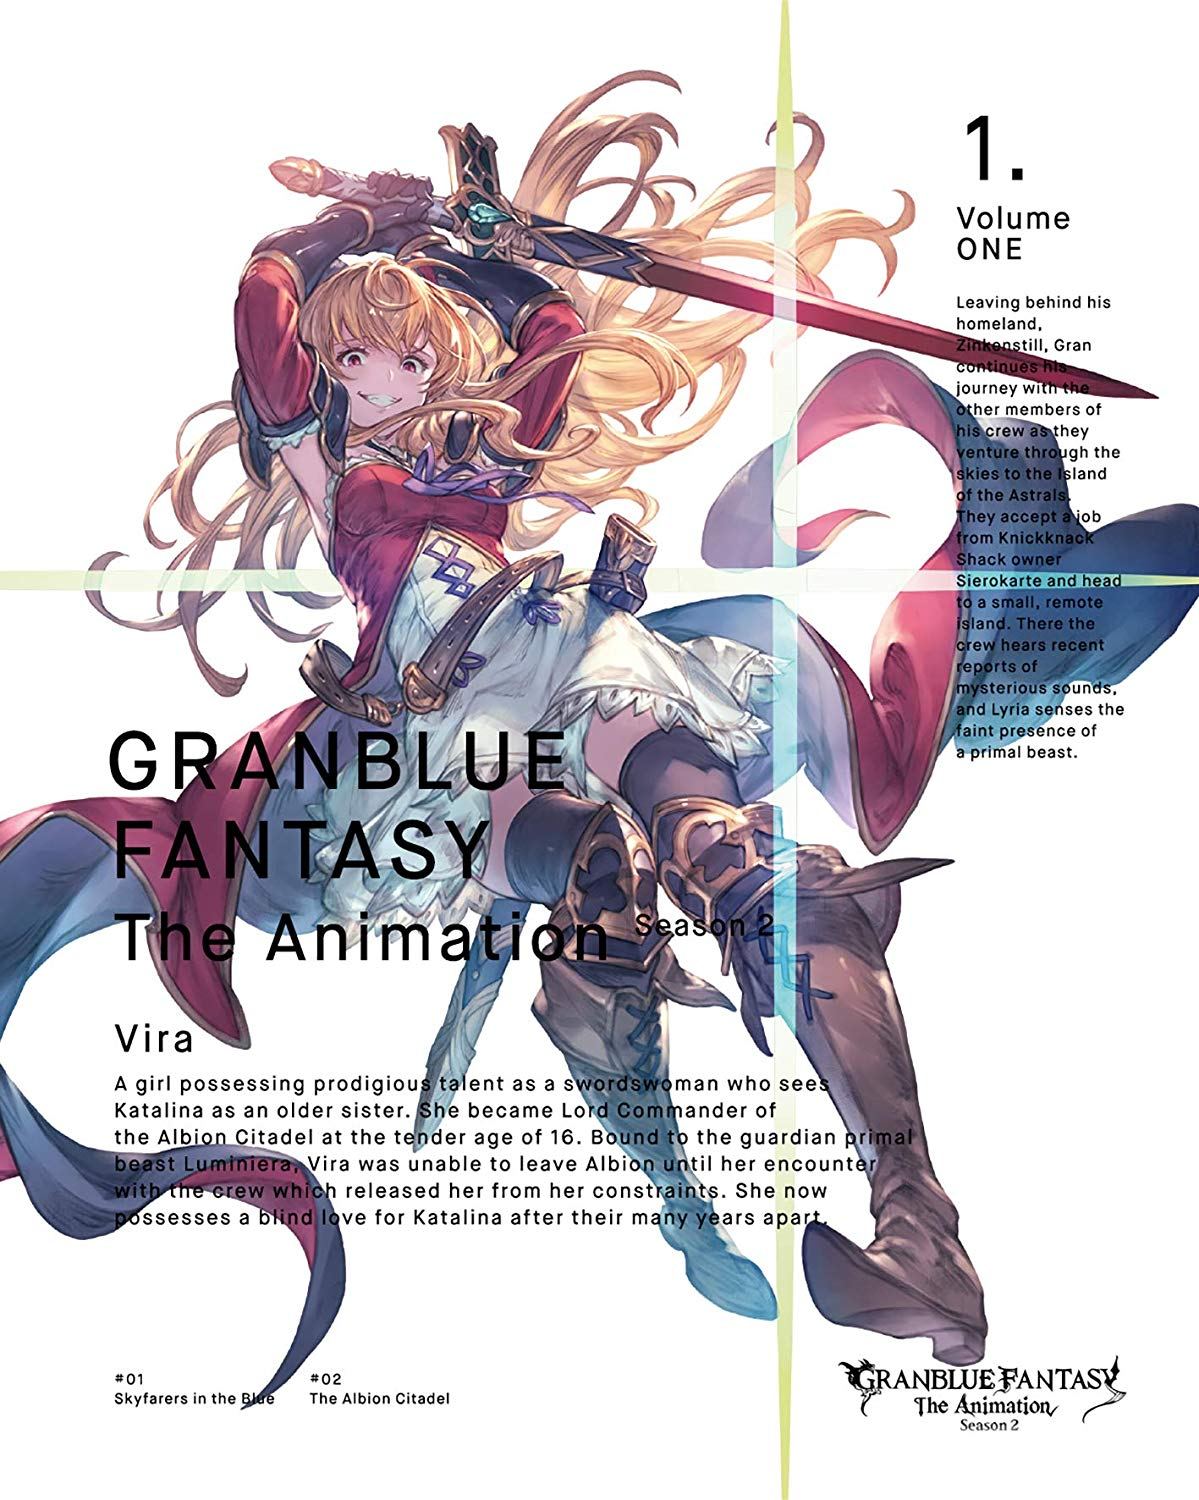 Granblue Fantasy The Animation Vol. 1 [Limited Edition]